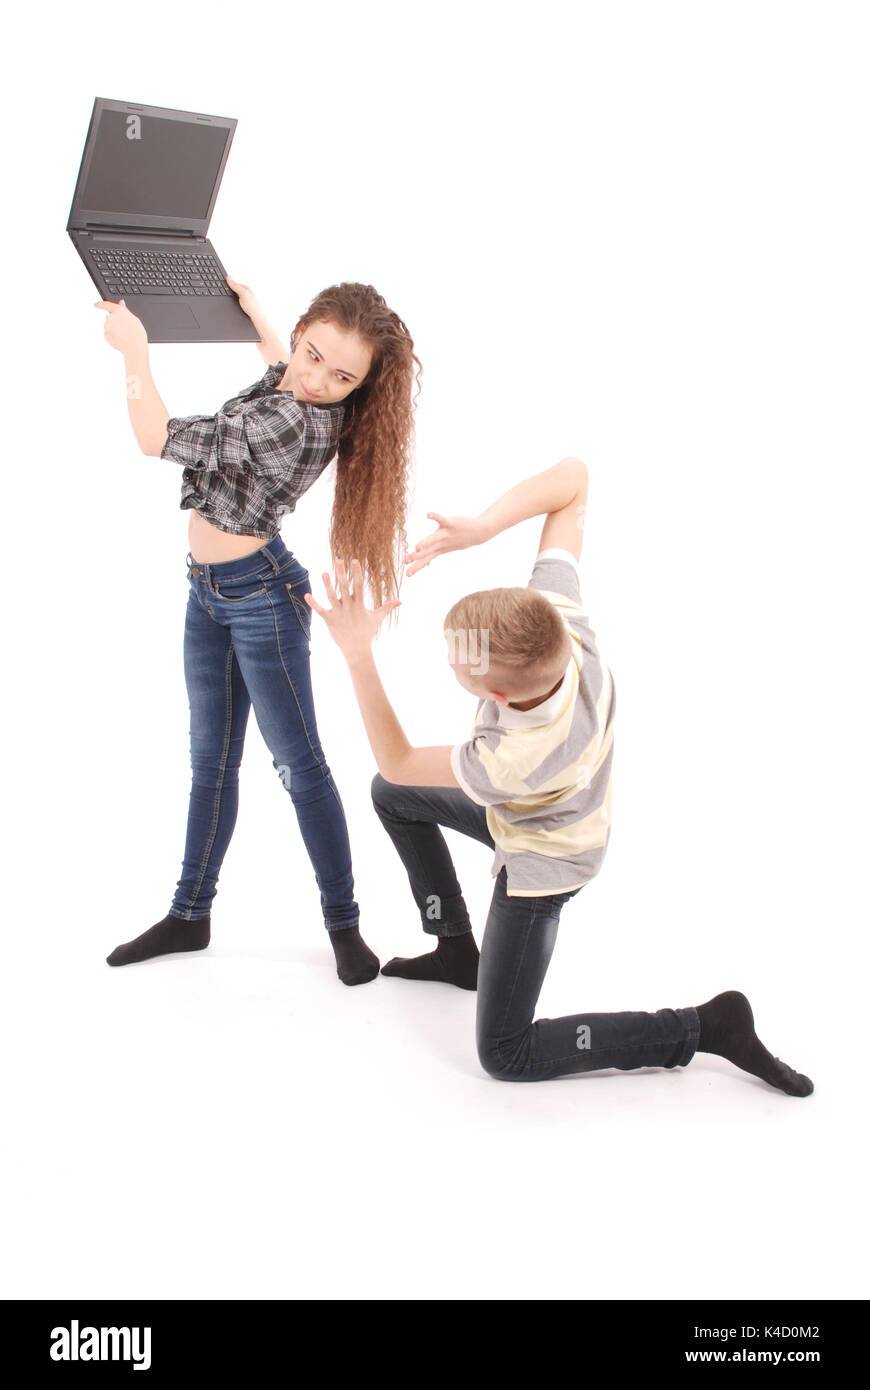 Boy and girl fighting over a laptop, isolated on white Stock Photo